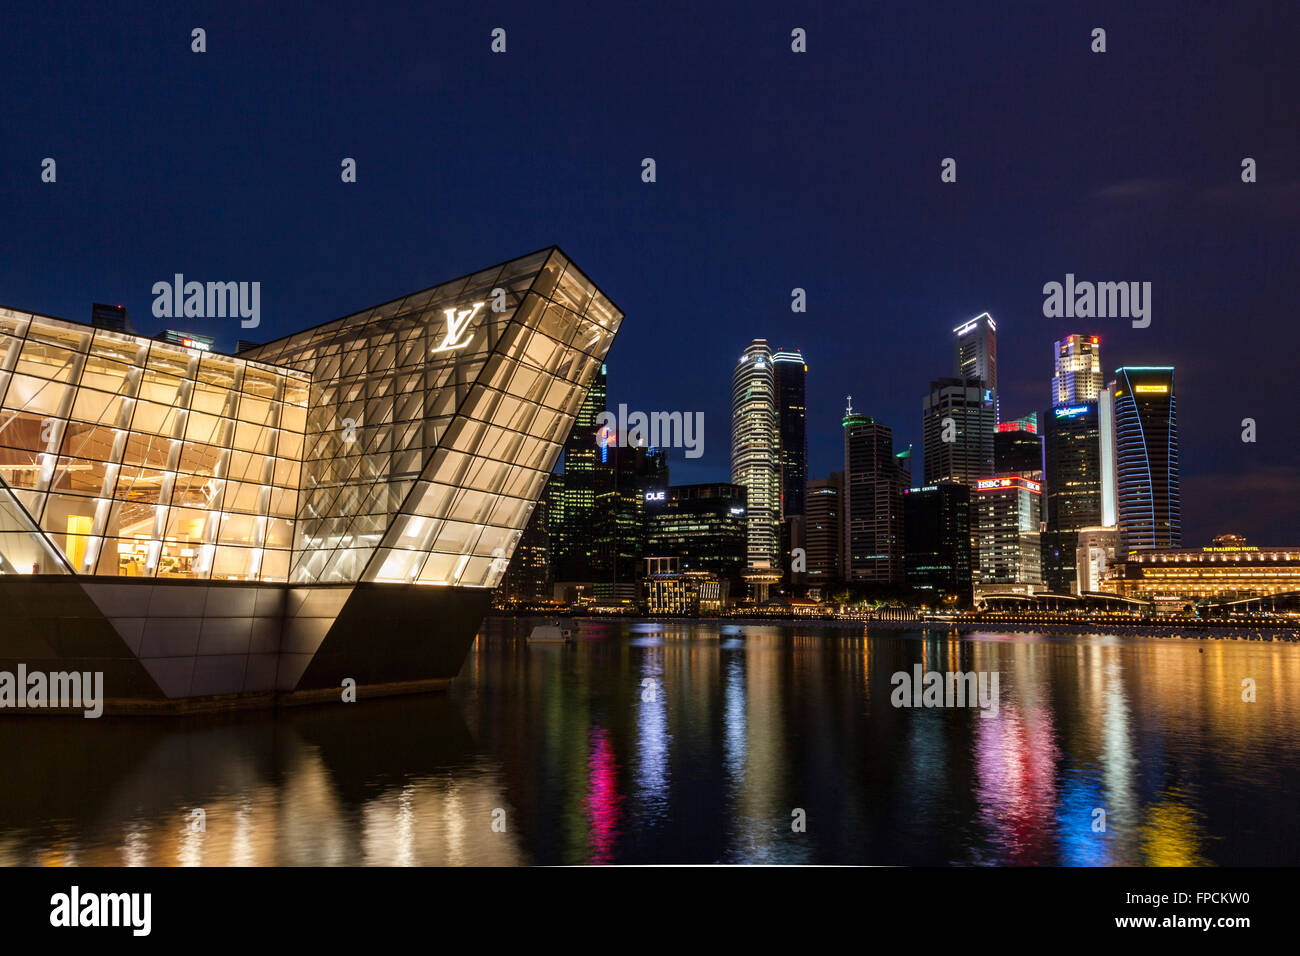 A view of the Louis Vuitton Island Maison in Singapore, the building is lit up at night time. Stock Photo